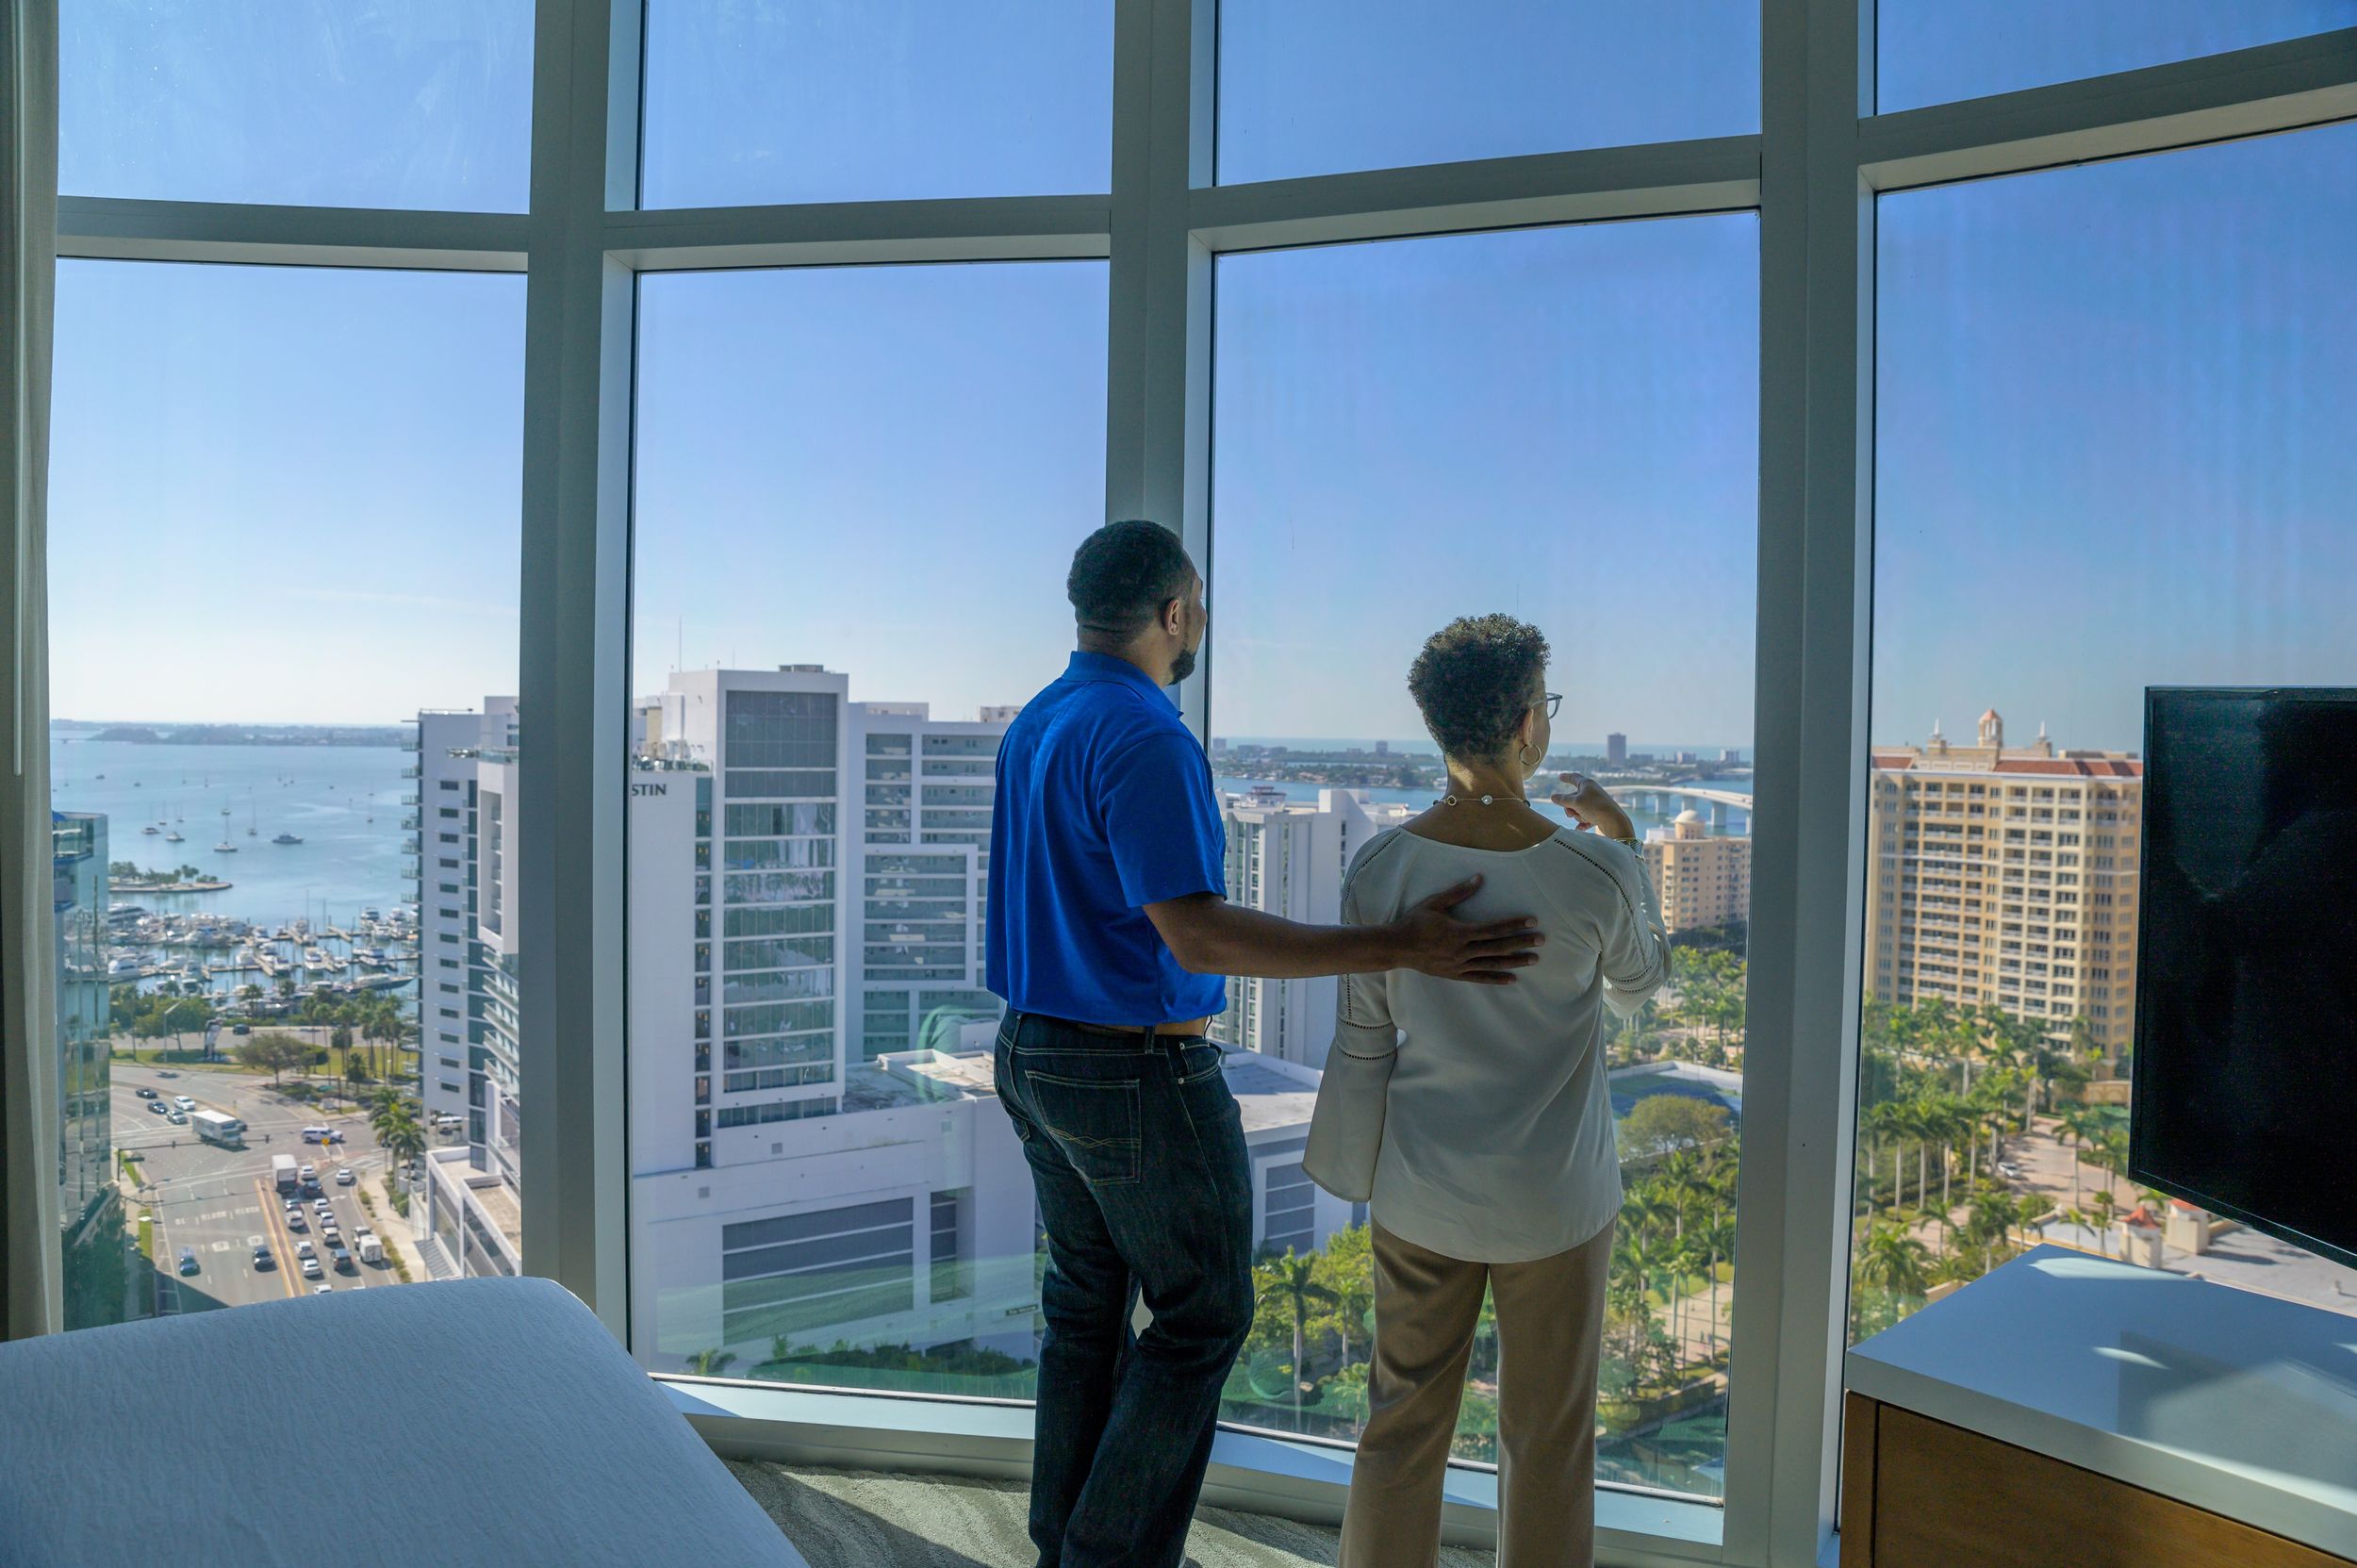 Two people in a high-rise apartment looking out the window at downtown Sarasota.